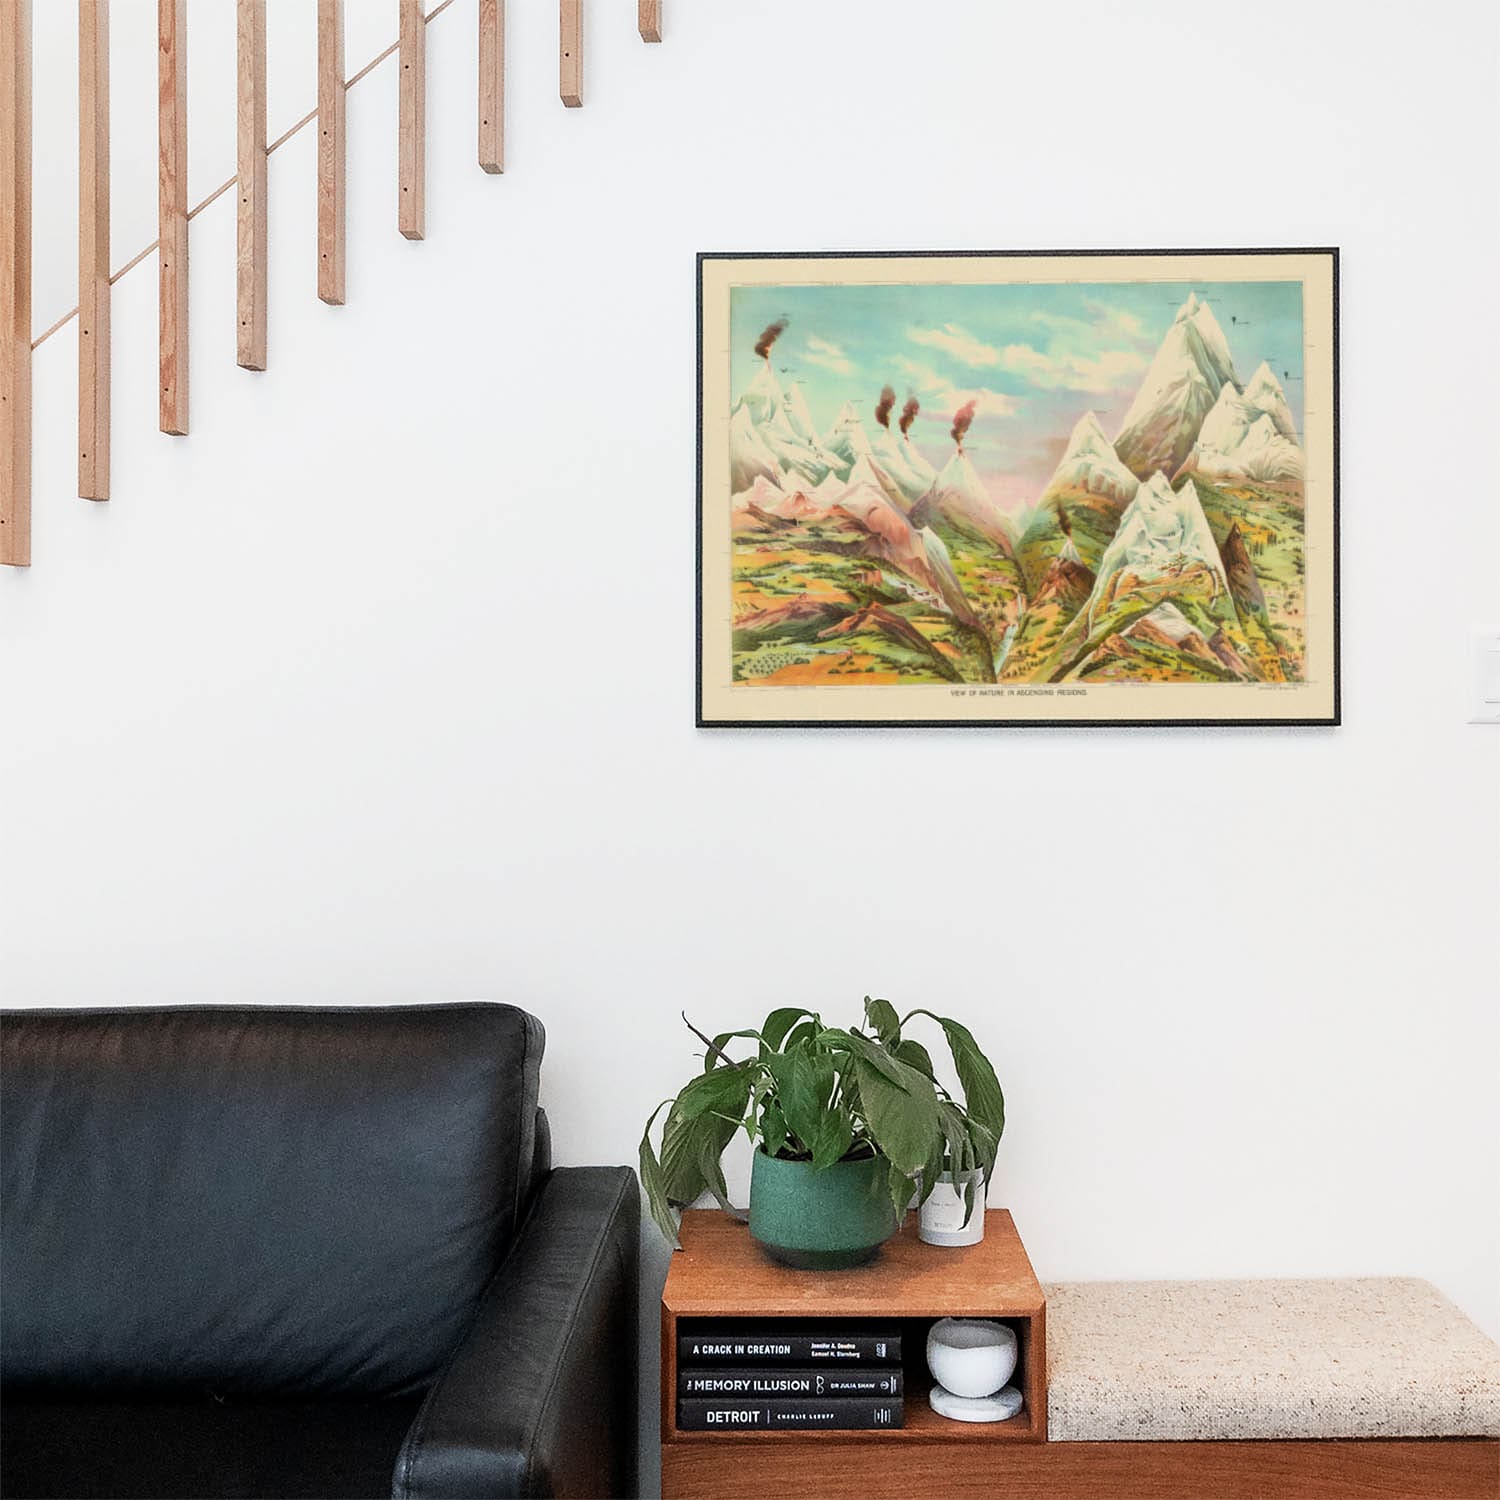 Cool Mountain Painting Wall Art Print in a Picture Frame on Living Room Wall